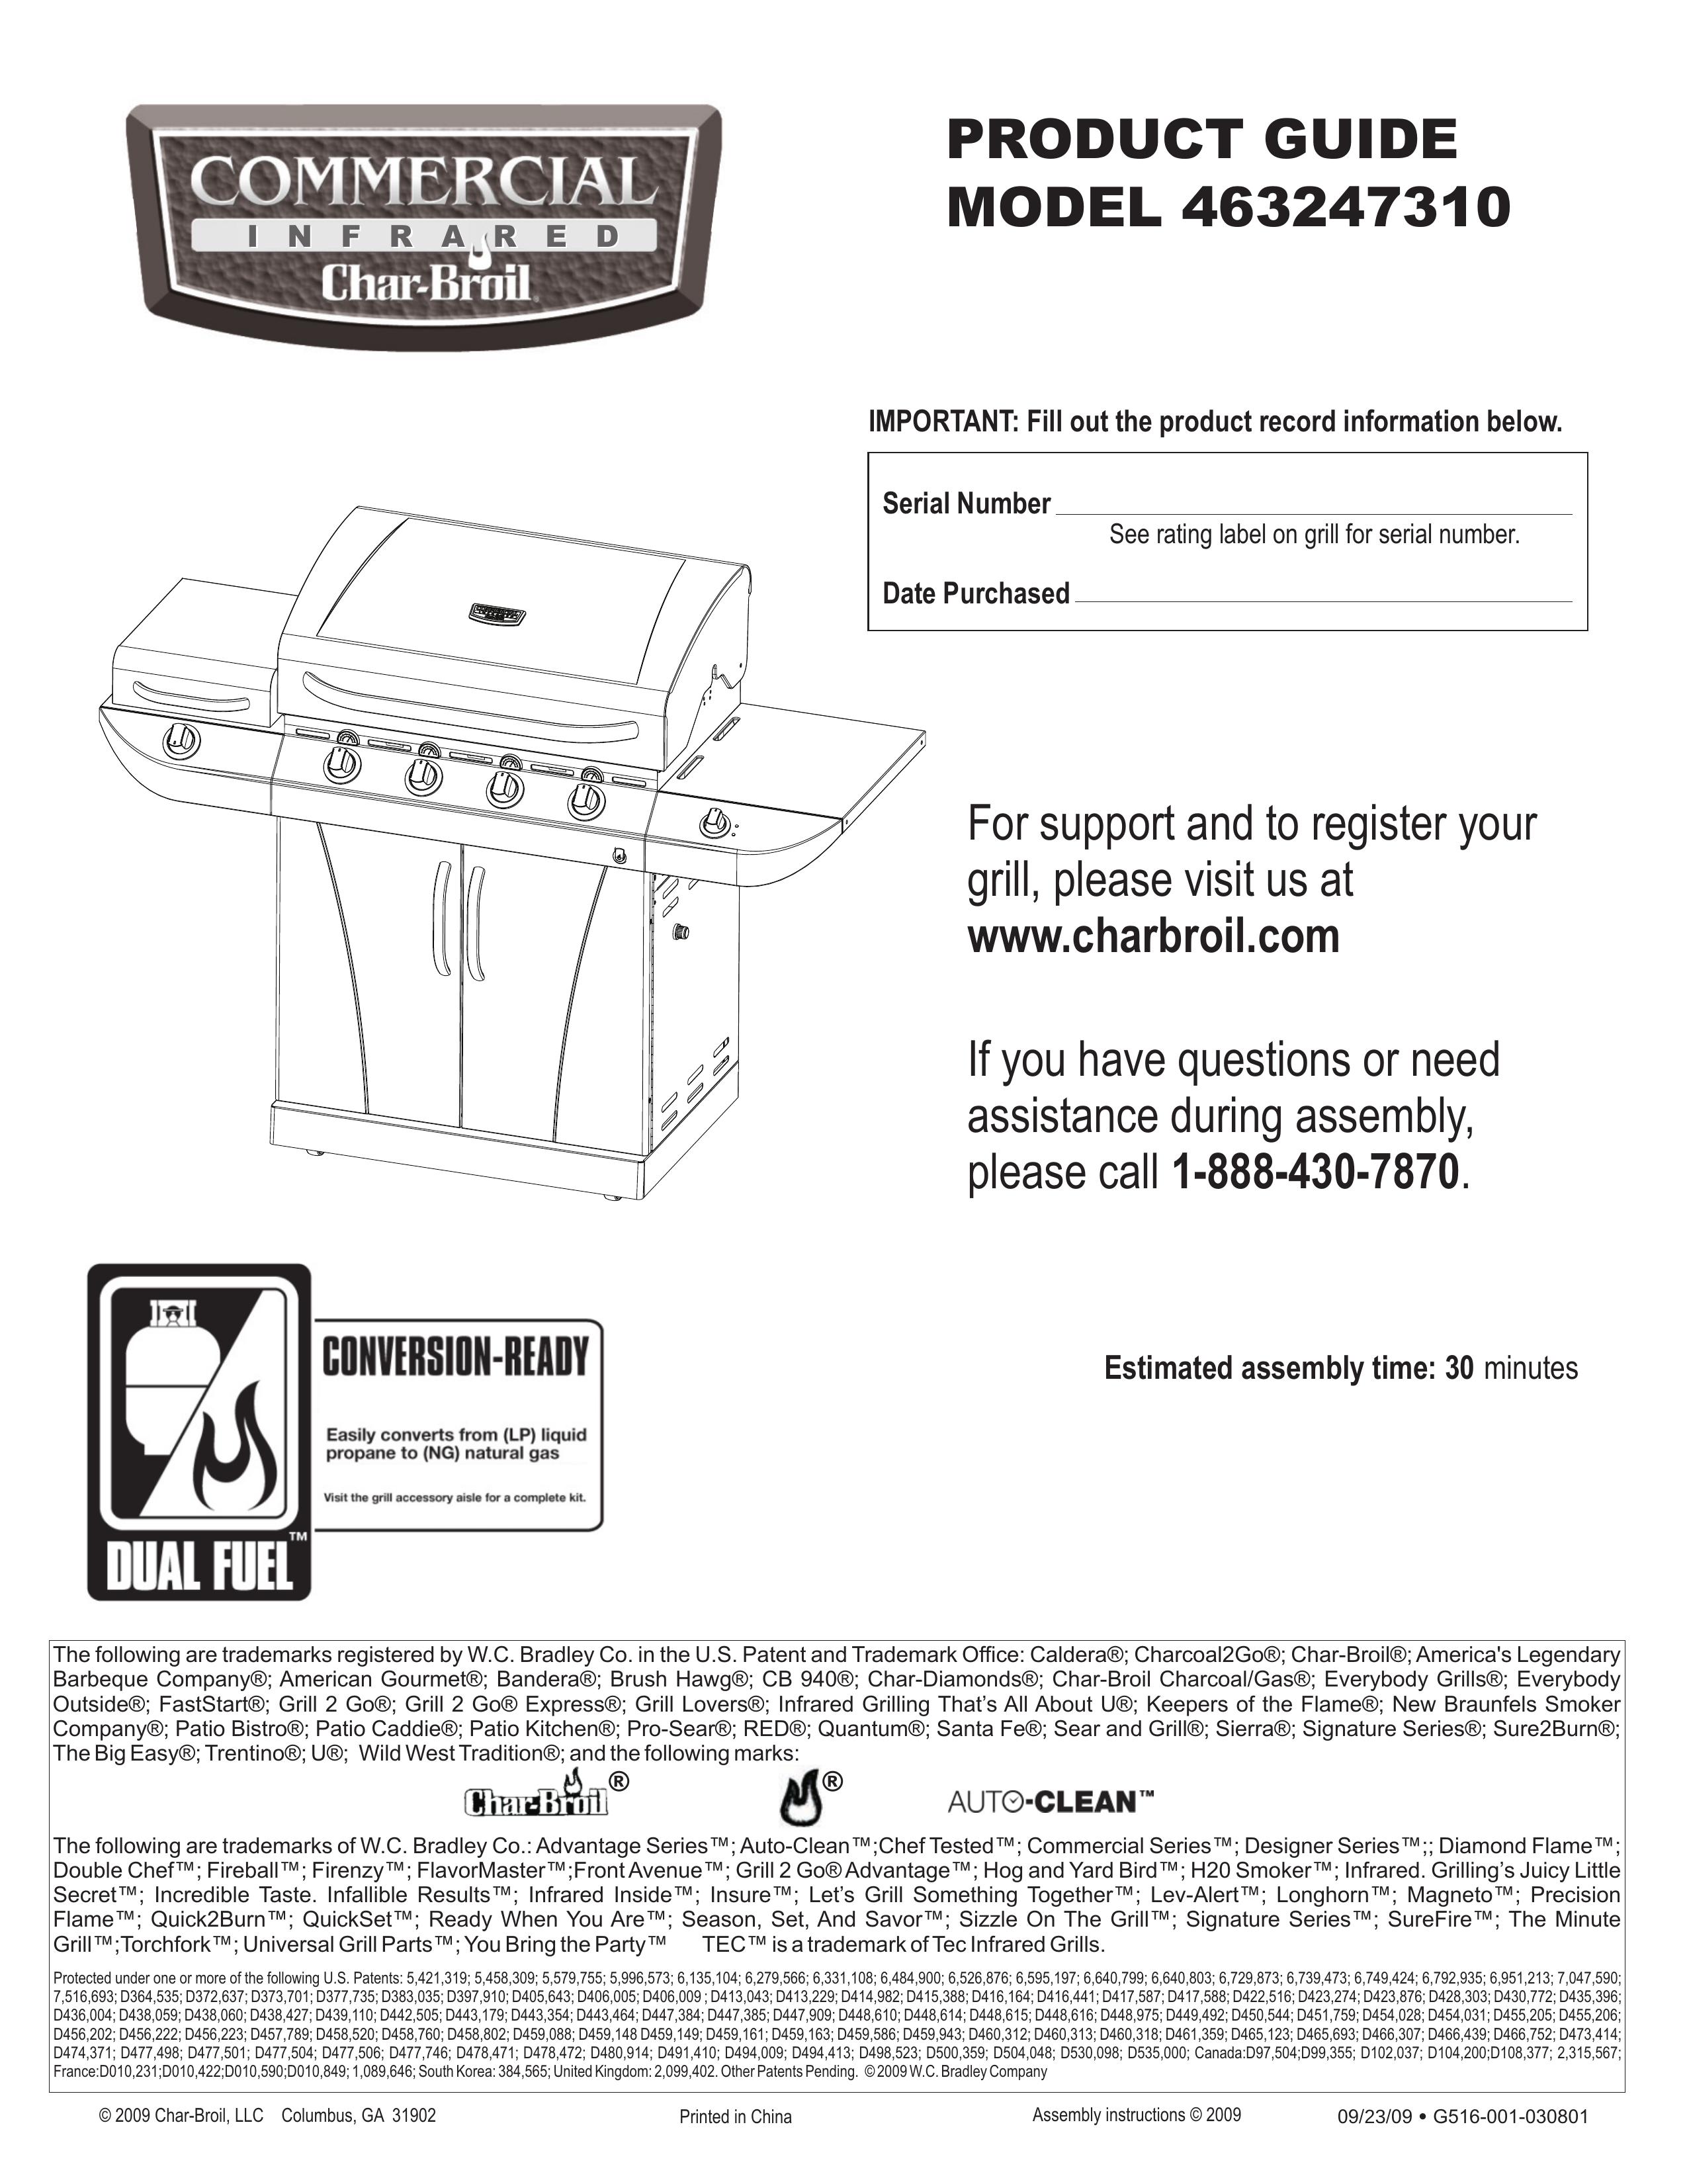 Char-Broil 463247310 Charcoal Grill User Manual